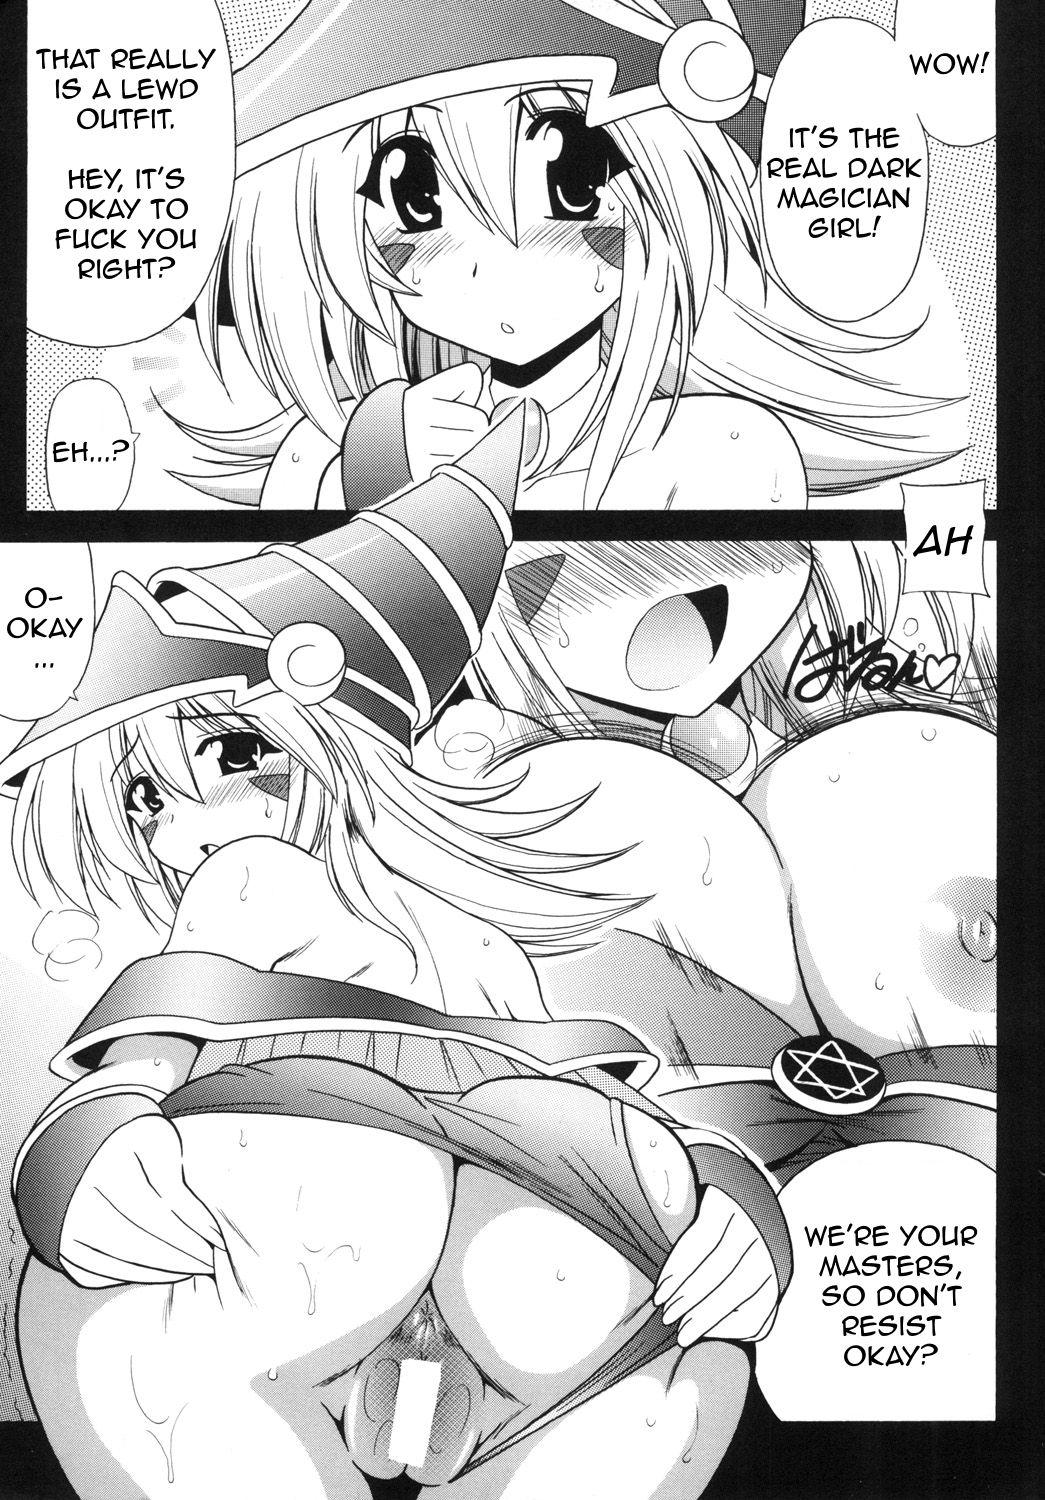 Hot Milf BMG to Ecchi Shiyou ♡ | Let's Have Sex with Dark Magician Girl ♡ - Yu gi oh Femboy - Page 3